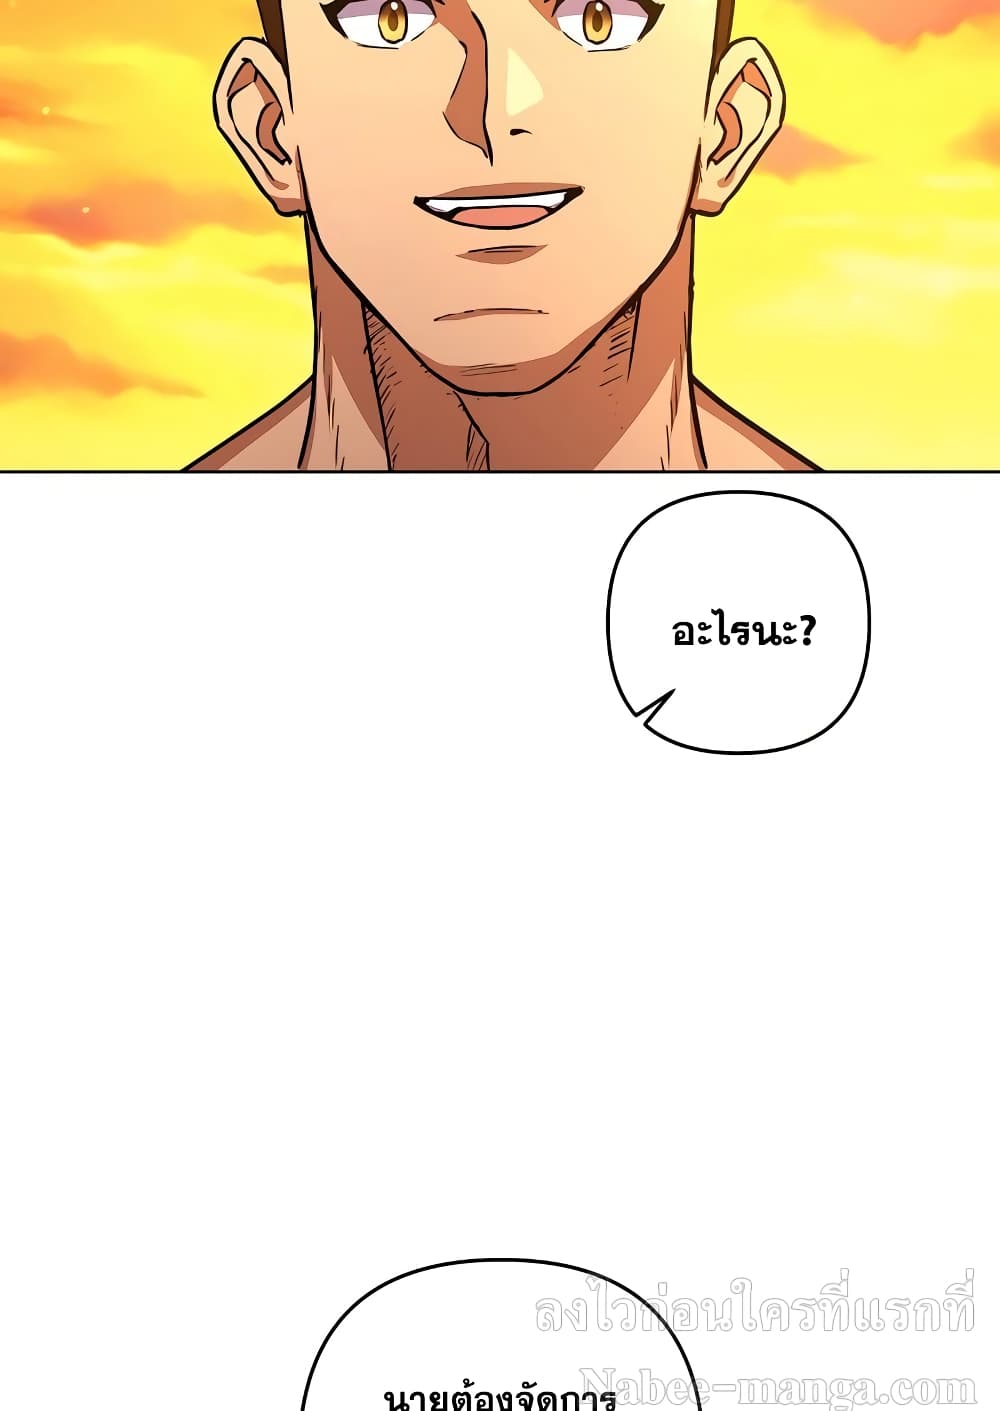 Surviving in an Action Manhwa 4-4